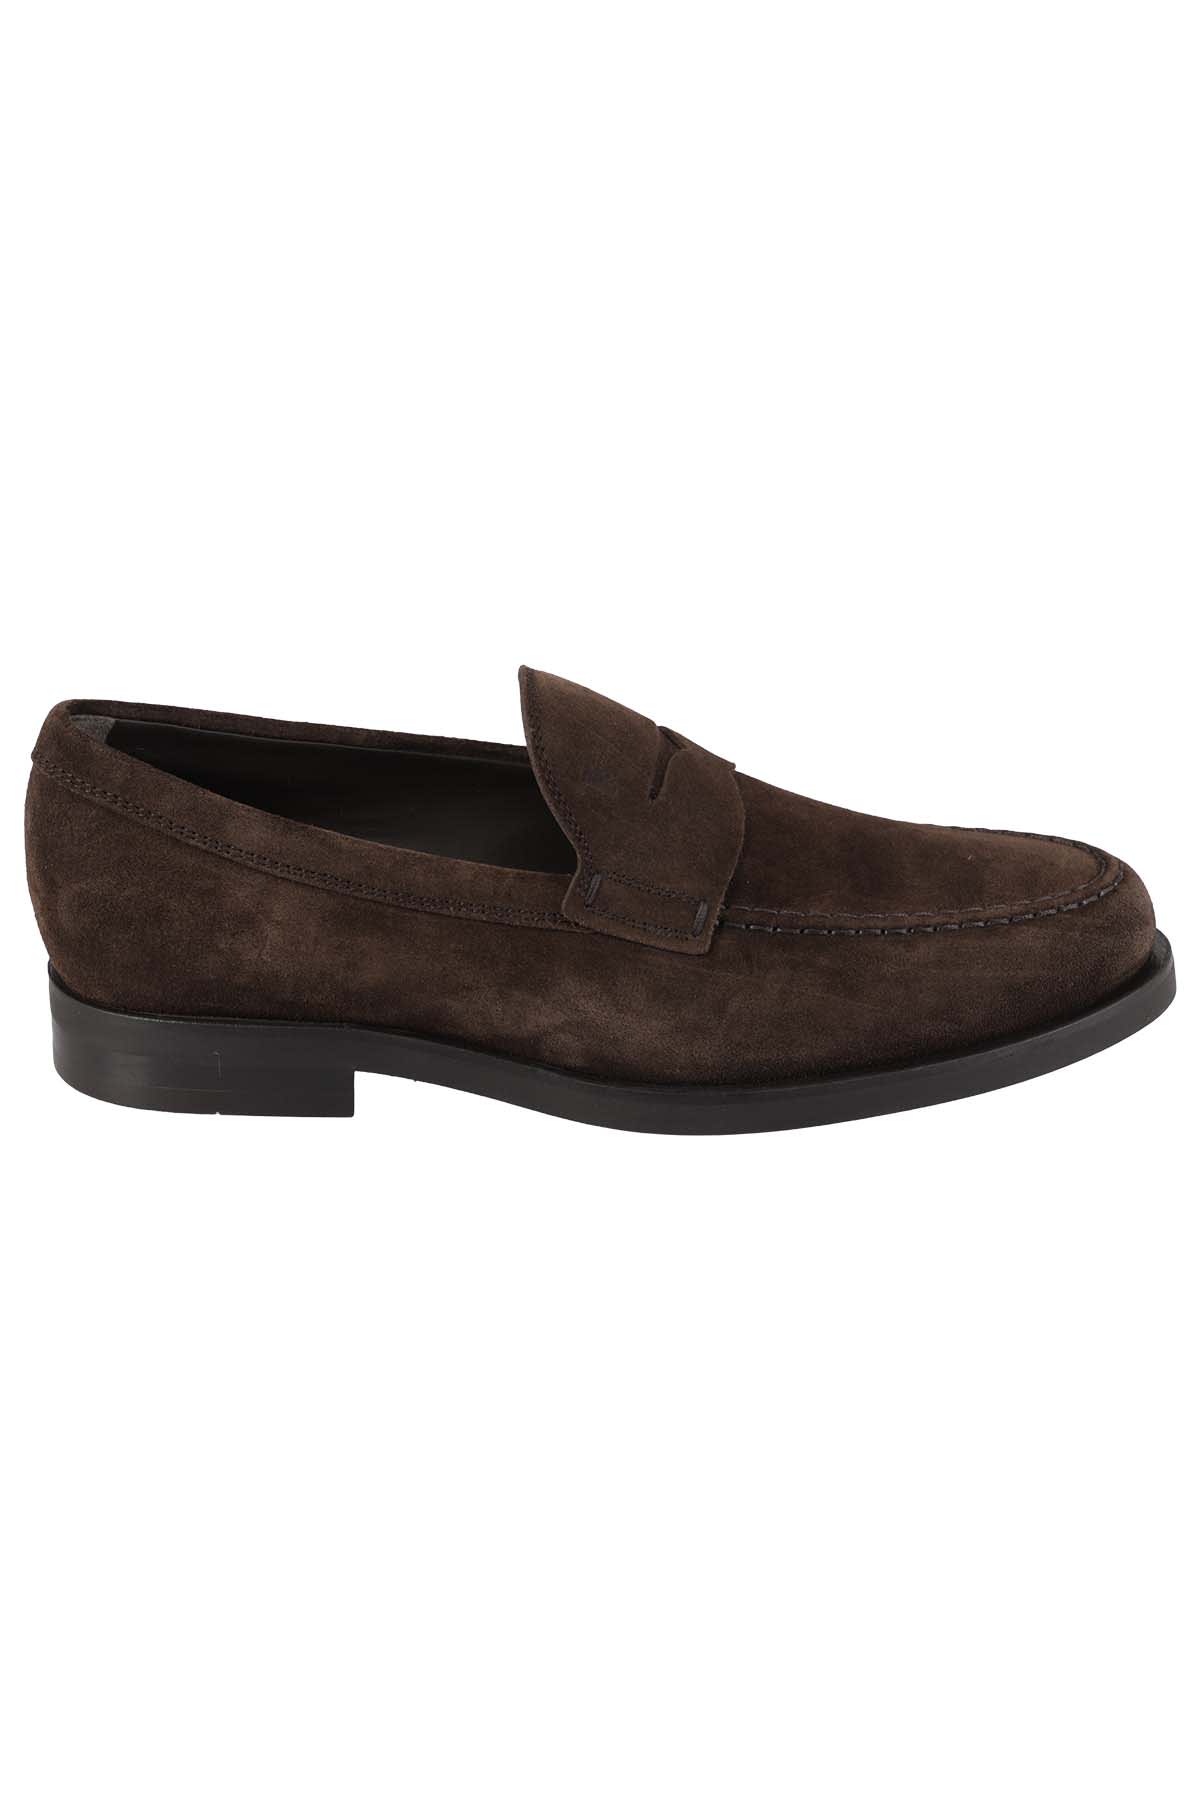 Tod's Mocassino Formale Gomma Zf